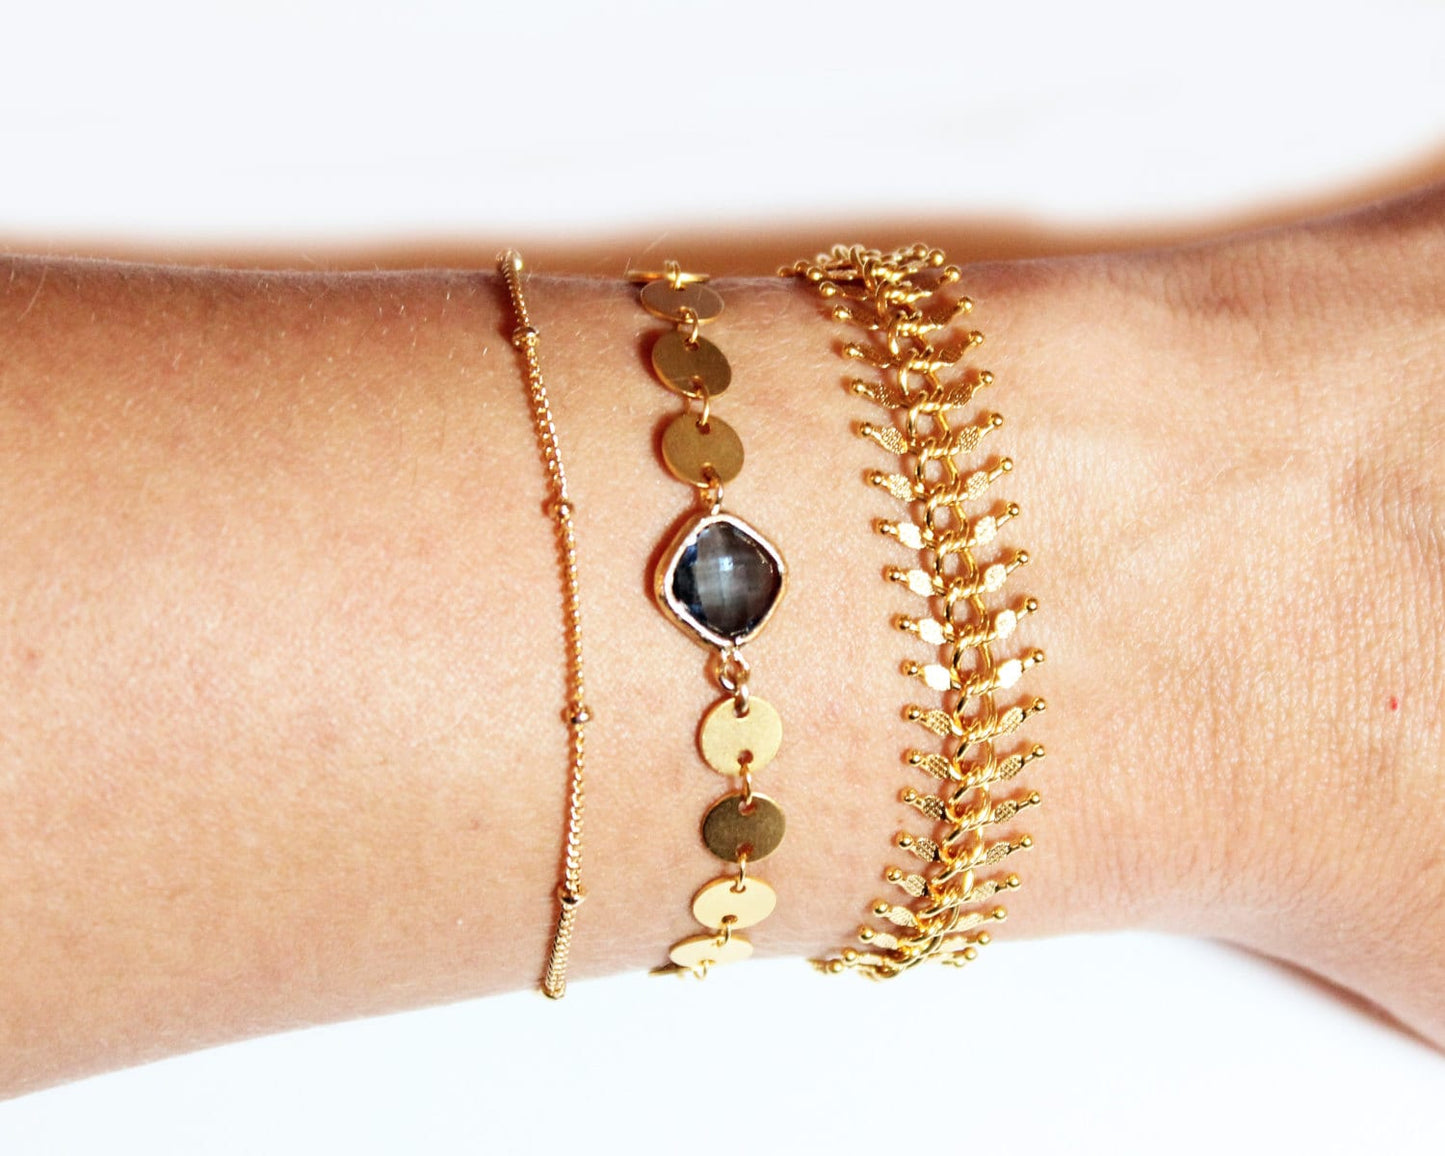 Gold Plated or Gold Filled Stacking Bracelet - BridesMaid Gift - Simple Gold Bracelet - Bead Chain Bracelet - Satellite Chain Bracelet